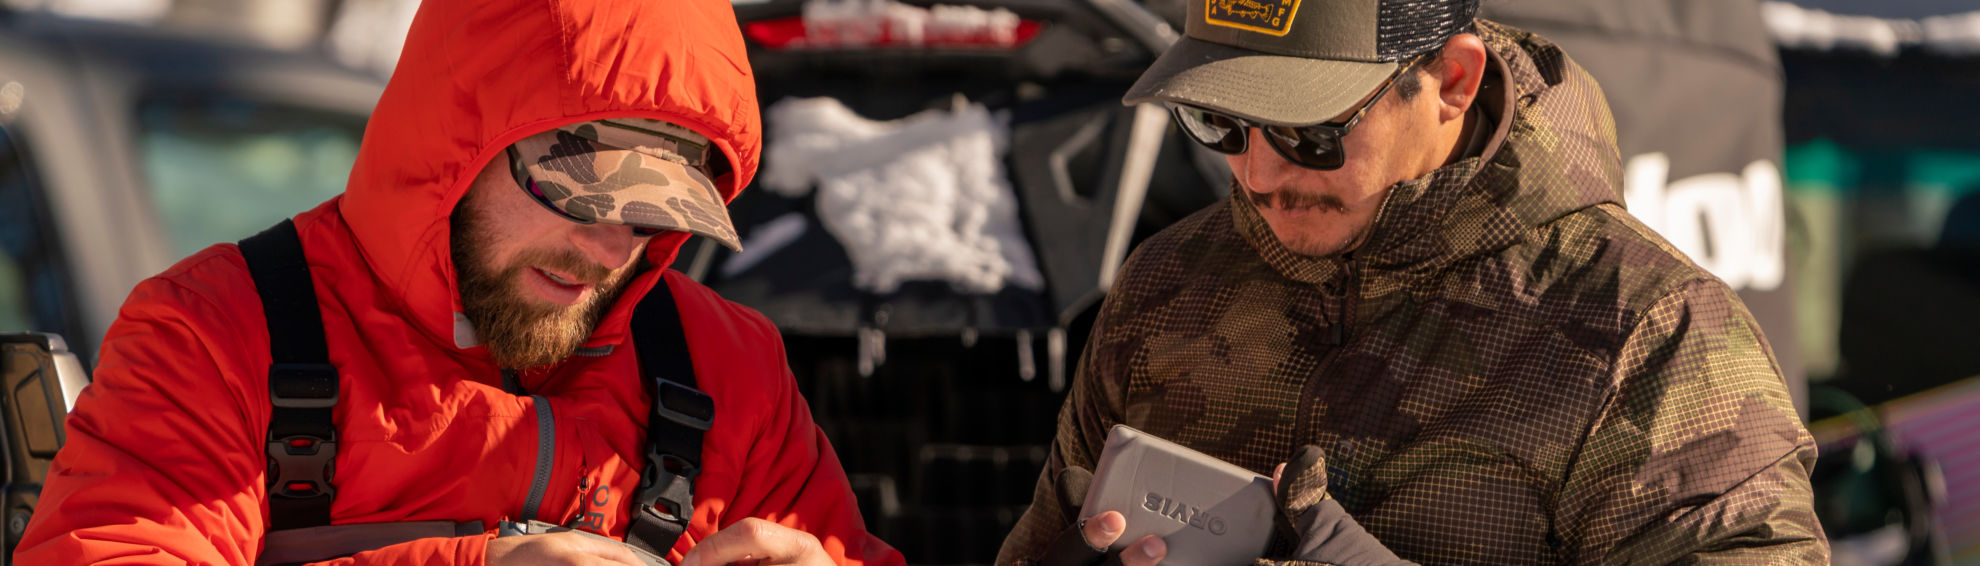 Two anglers gear up before a trip